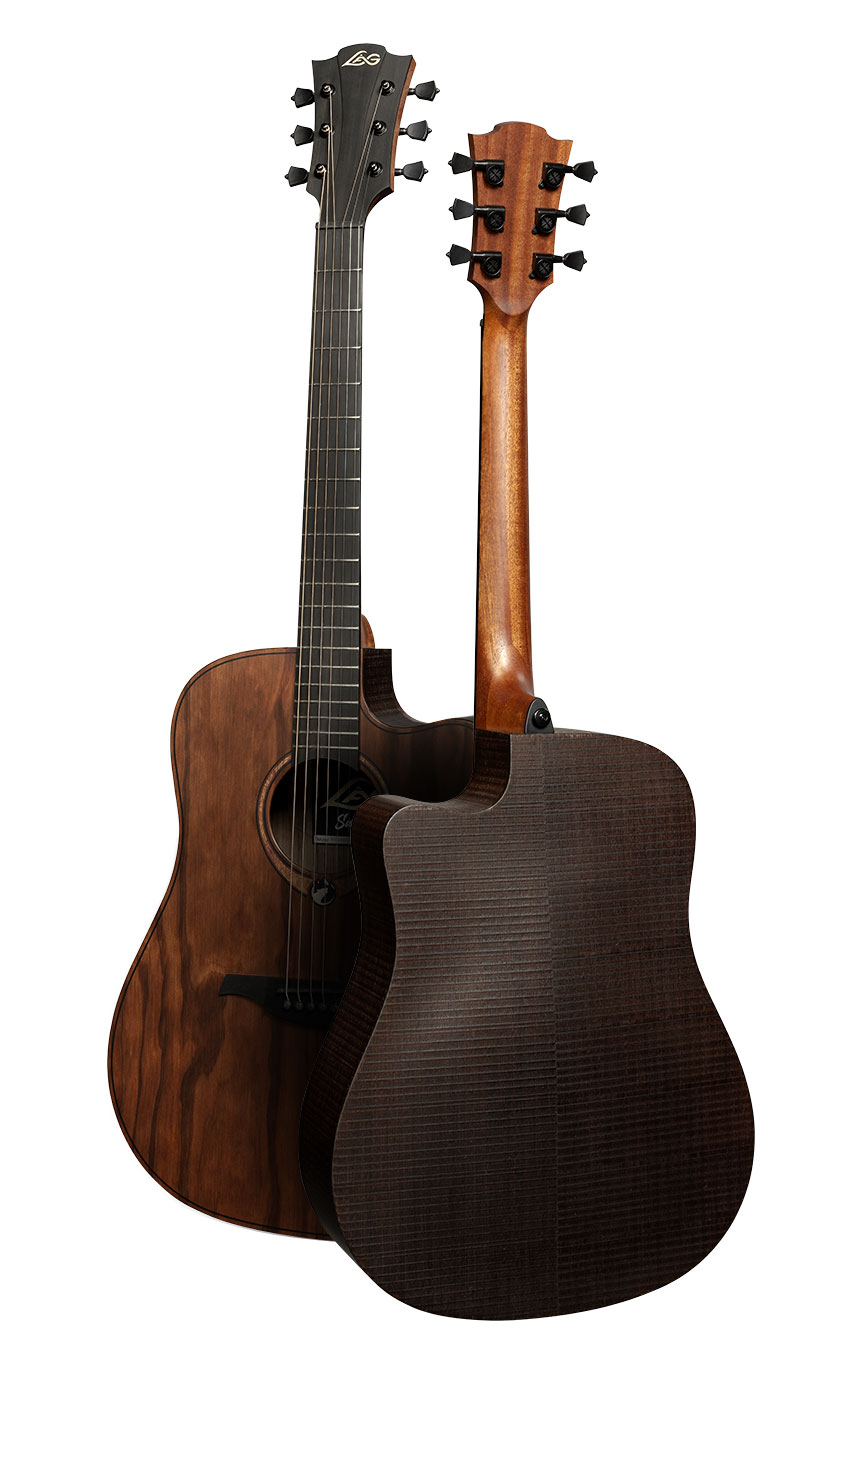 Lag-Sauvage-DCE-(DREADNOUGHT-CUTAWAY-ACOUSTIC-ELECTRIC)_05_133719.jpg